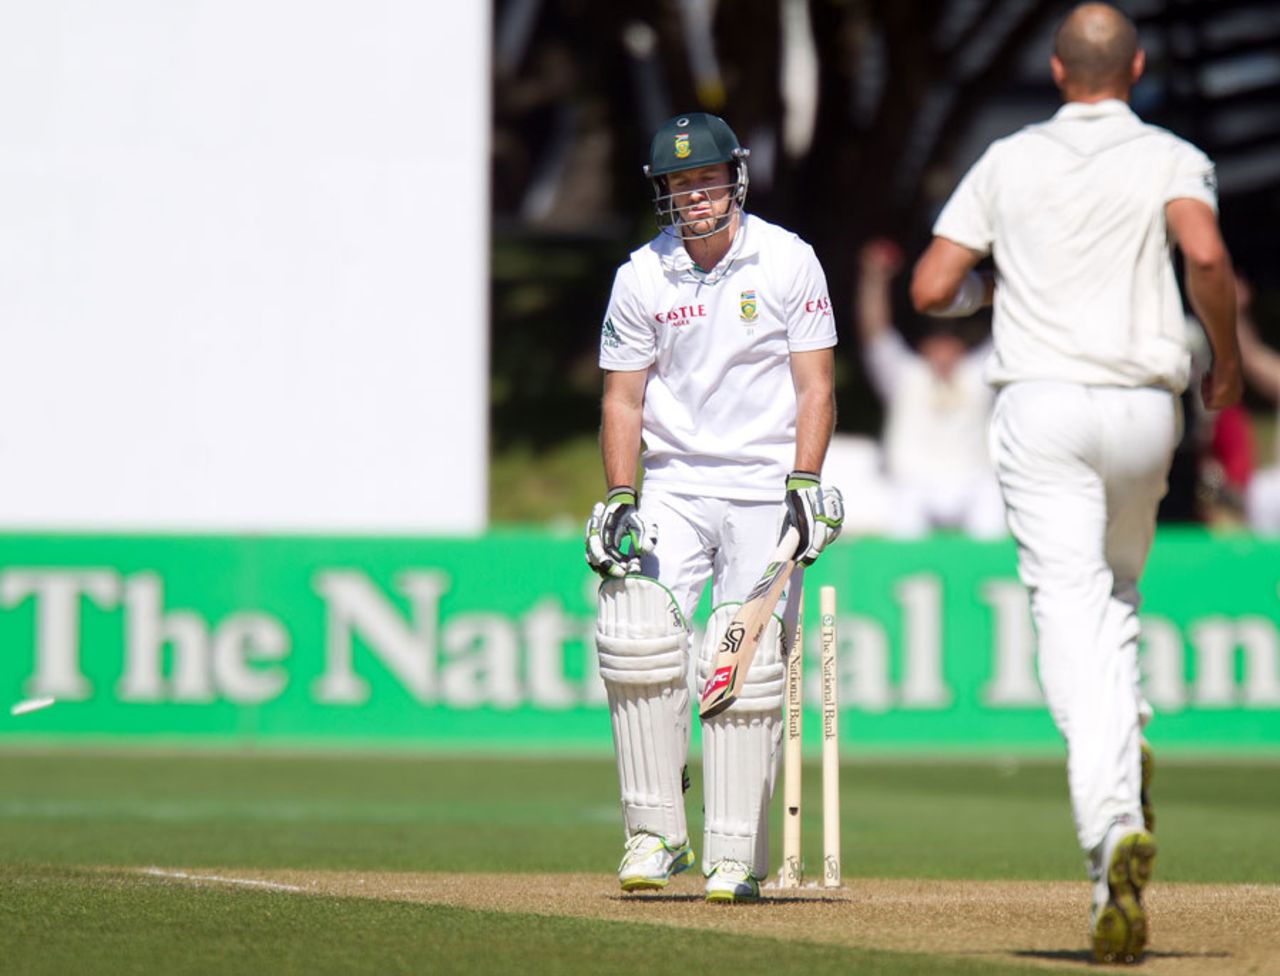 AB de Villiers is bowled by Chris Martin, New Zealand v South Africa, 3rd Test, Wellington, 3rd day, March 25, 2012